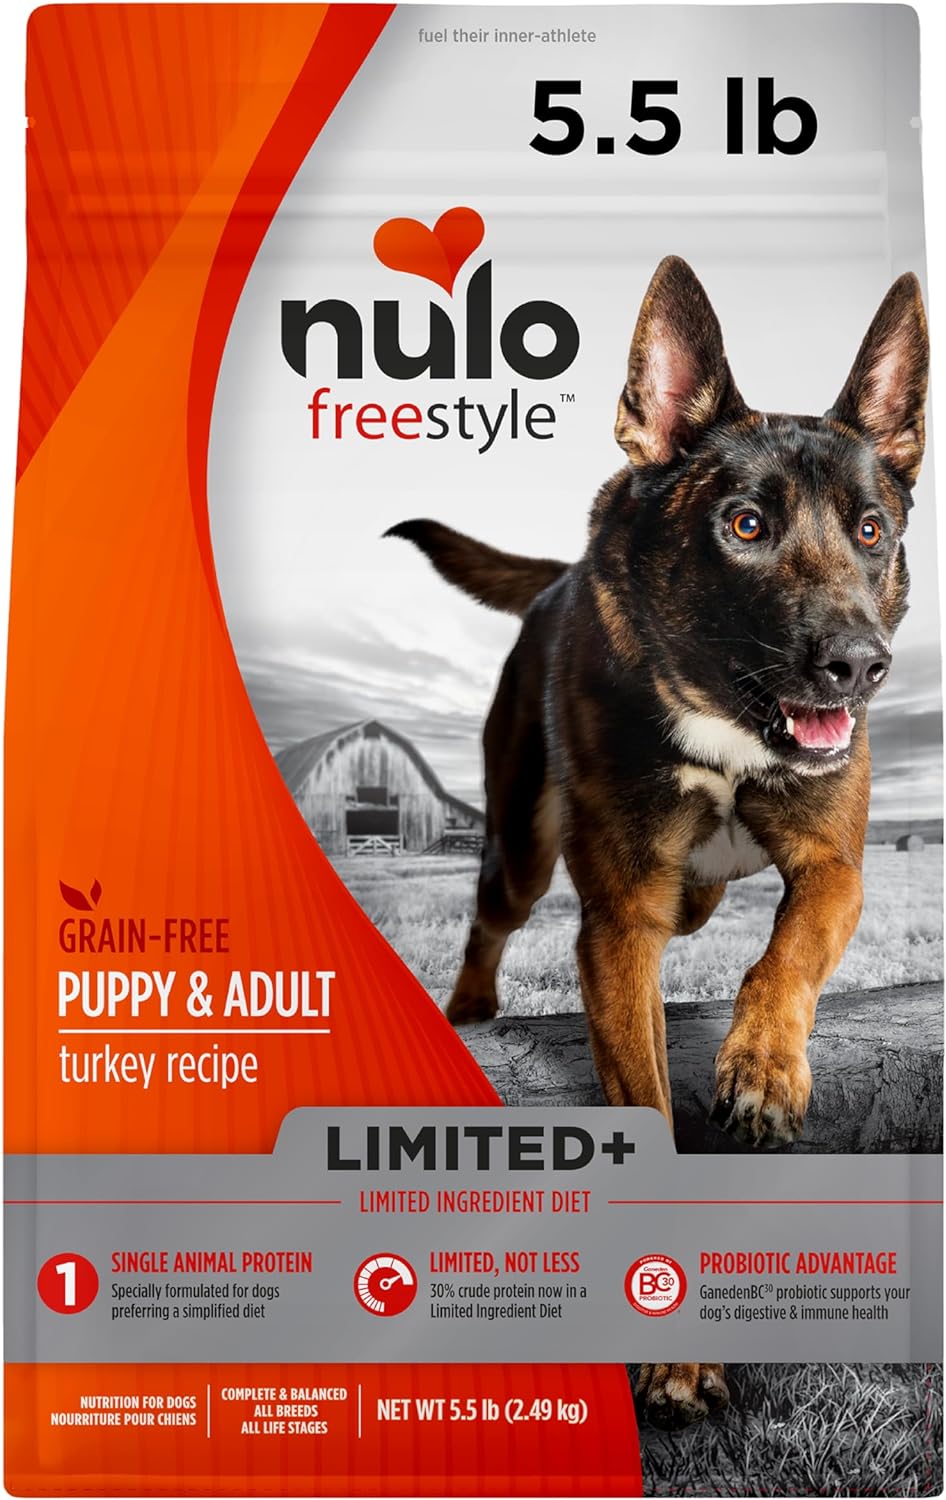 Nulo Freestyle All Breed Dog Food, Premium Allergy Friendly Adult & Puppy Grain-Free Dry Kibble Dog Food, Single Animal Protein with BC30 Probiotic for Healthy Digestive Support 5.5 Pound (Pack of 1)